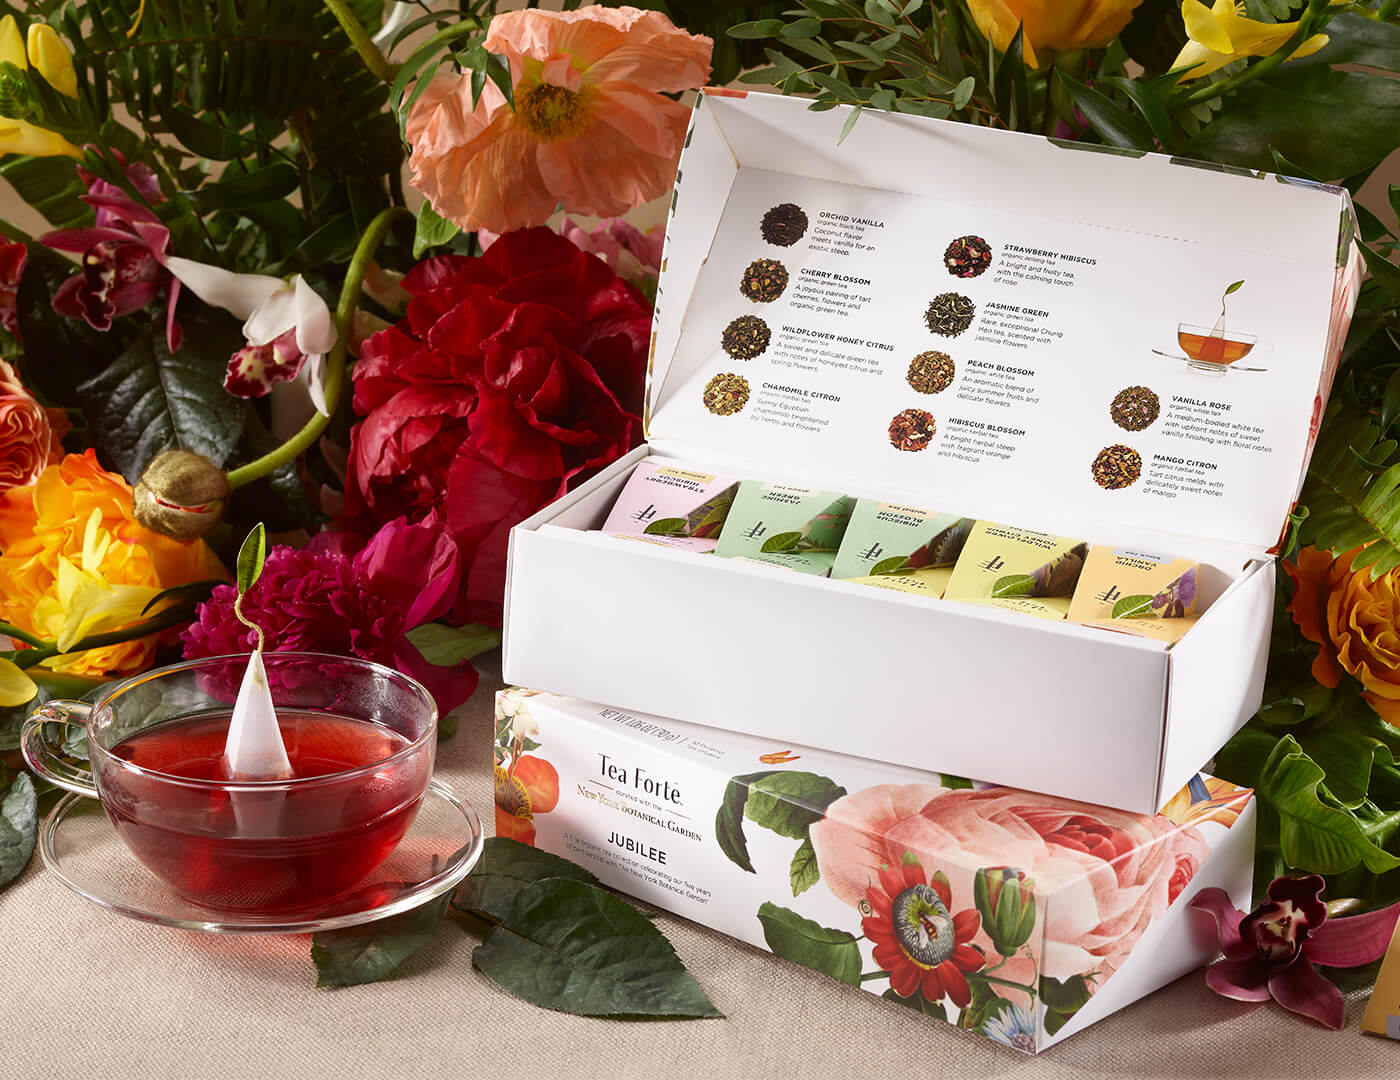 Jubilee Petite Presentation Box of 10 pyramid teas, lid open, on a table with flowers and a glass cup of tea